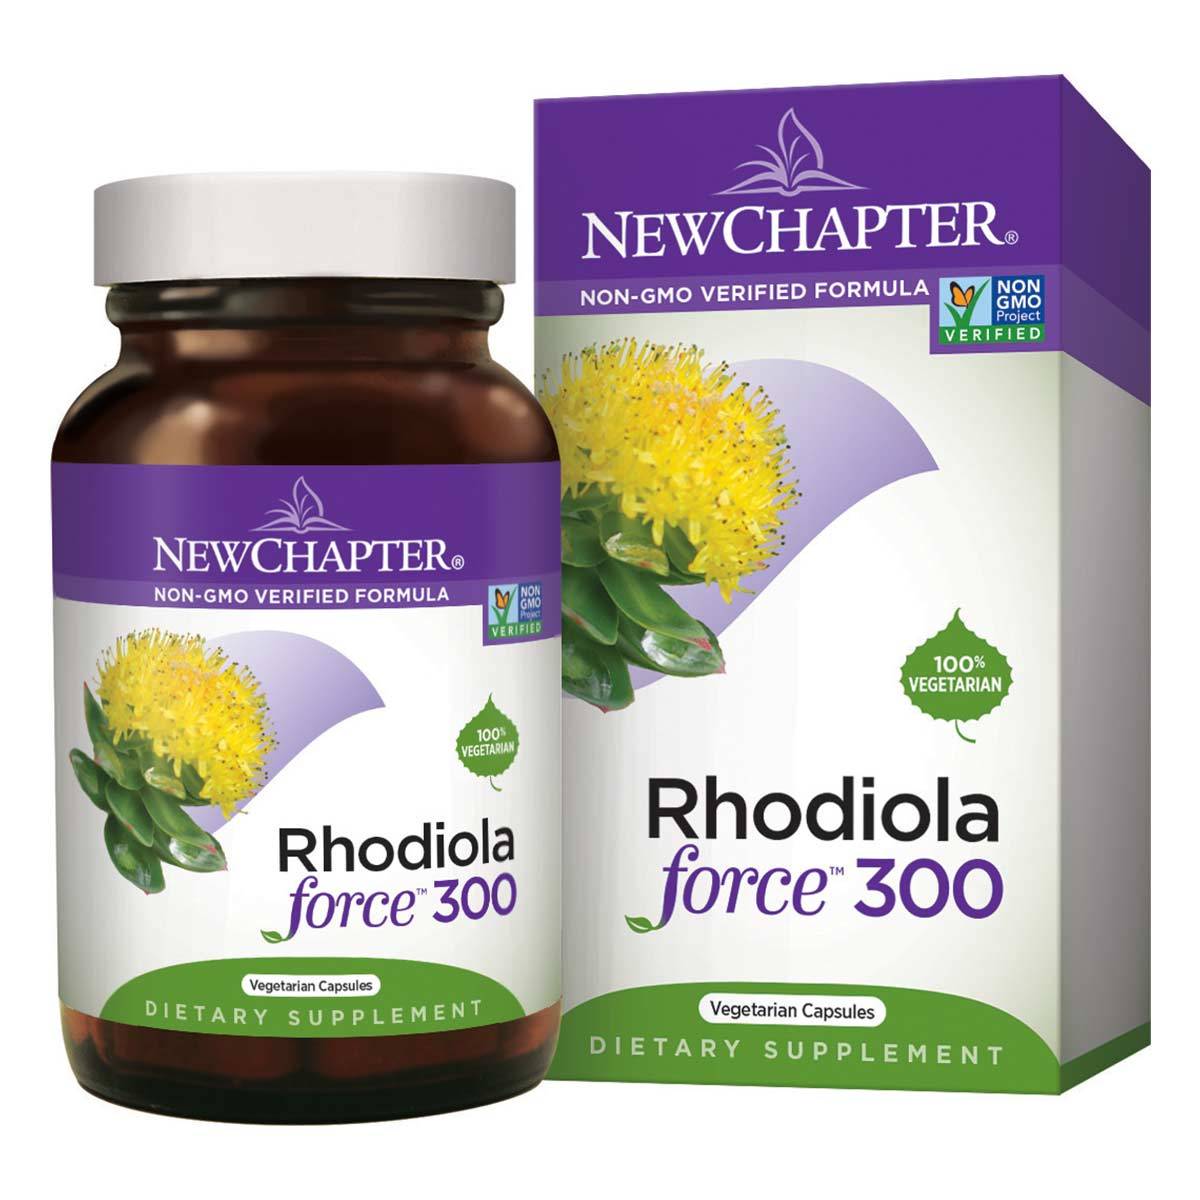 Primary image of Rhodiolaforce 300